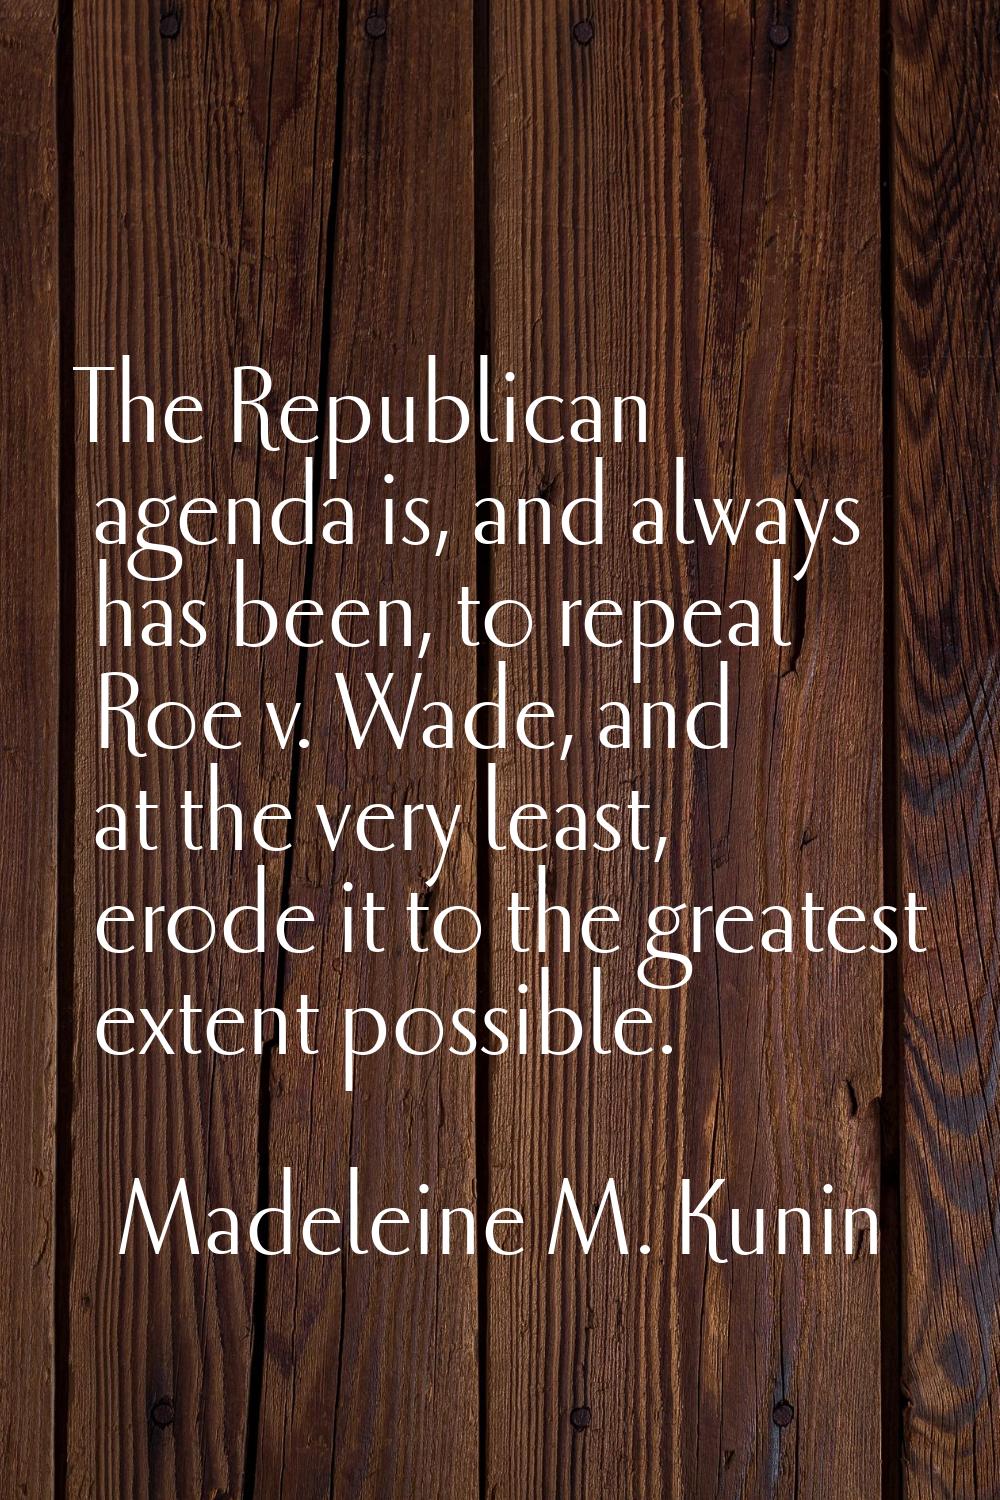 The Republican agenda is, and always has been, to repeal Roe v. Wade, and at the very least, erode 